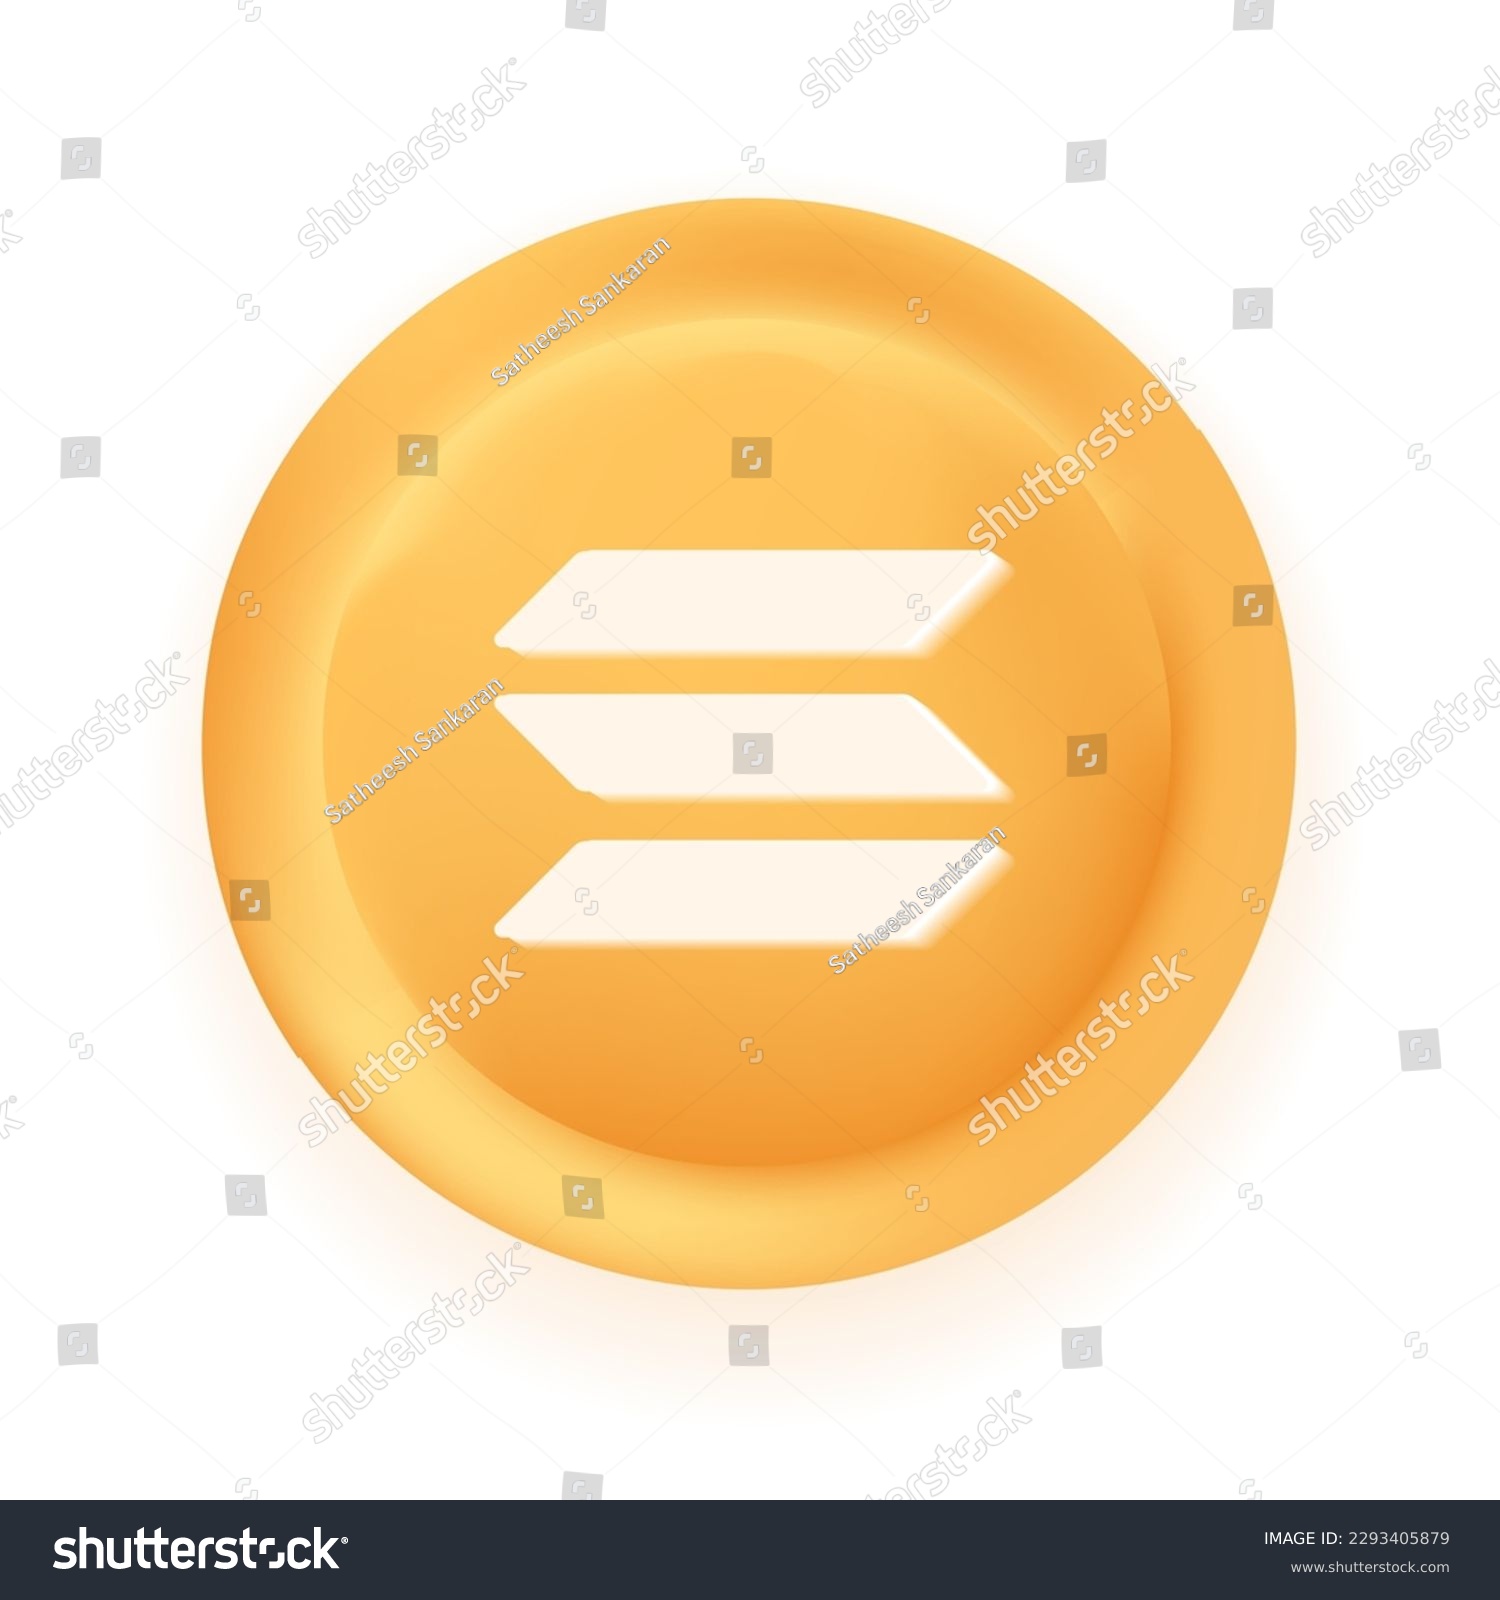 SVG of Solana (SOL) crypto currency 3D coin vector illustration isolated on white background. Can be used as virtual money icon, logo, emblem, sticker and badge designs. svg